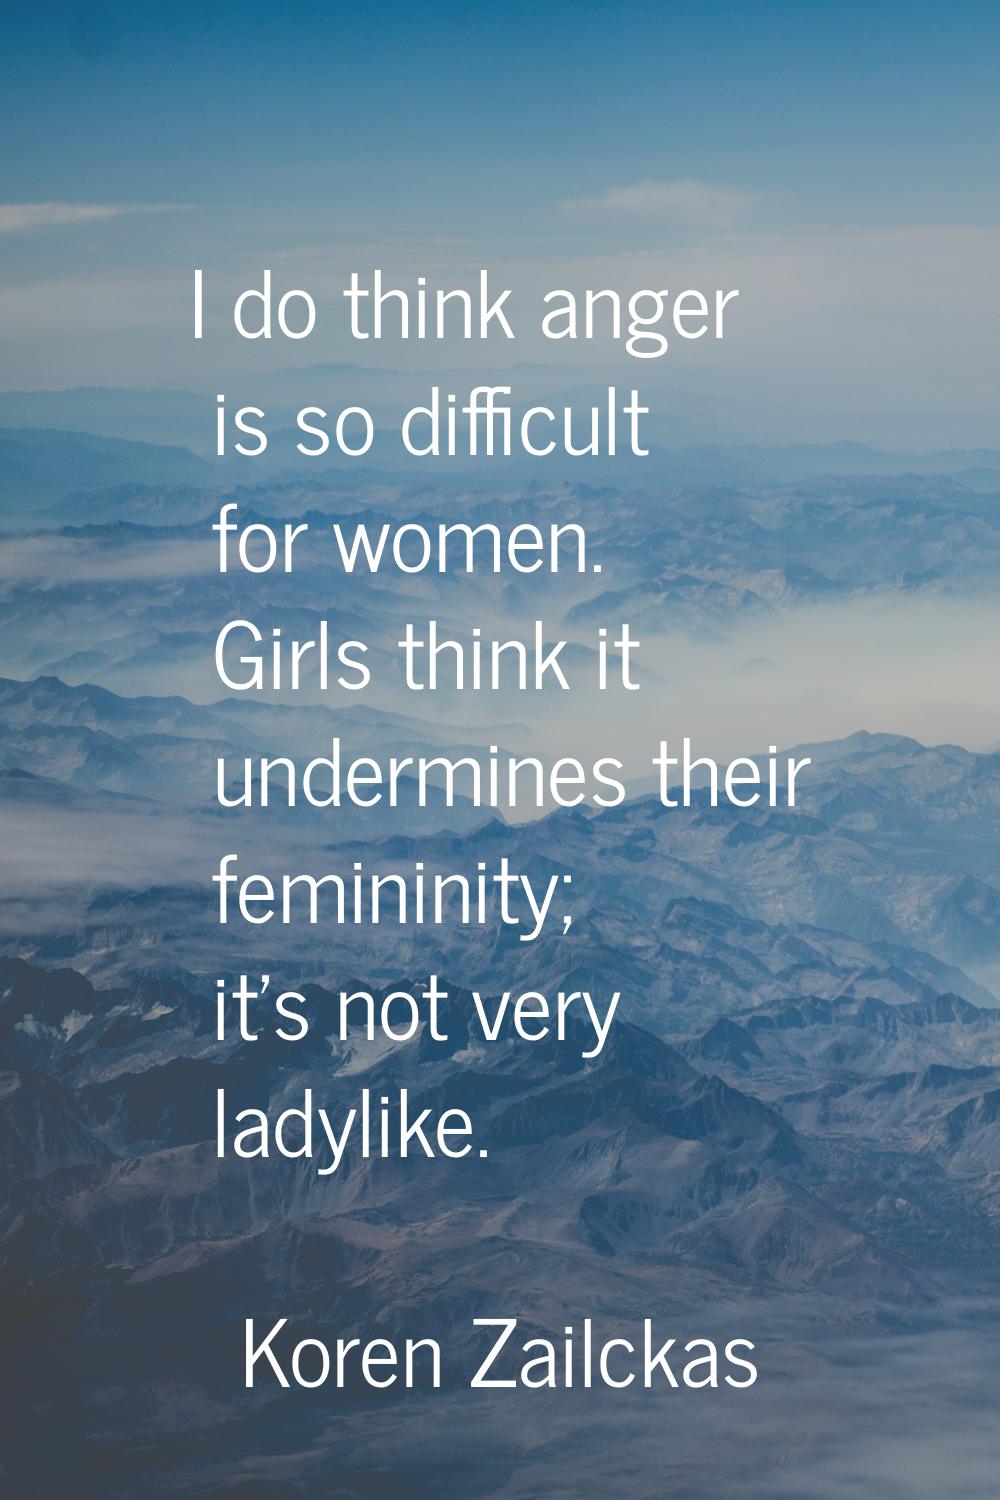 I do think anger is so difficult for women. Girls think it undermines their femininity; it's not ve